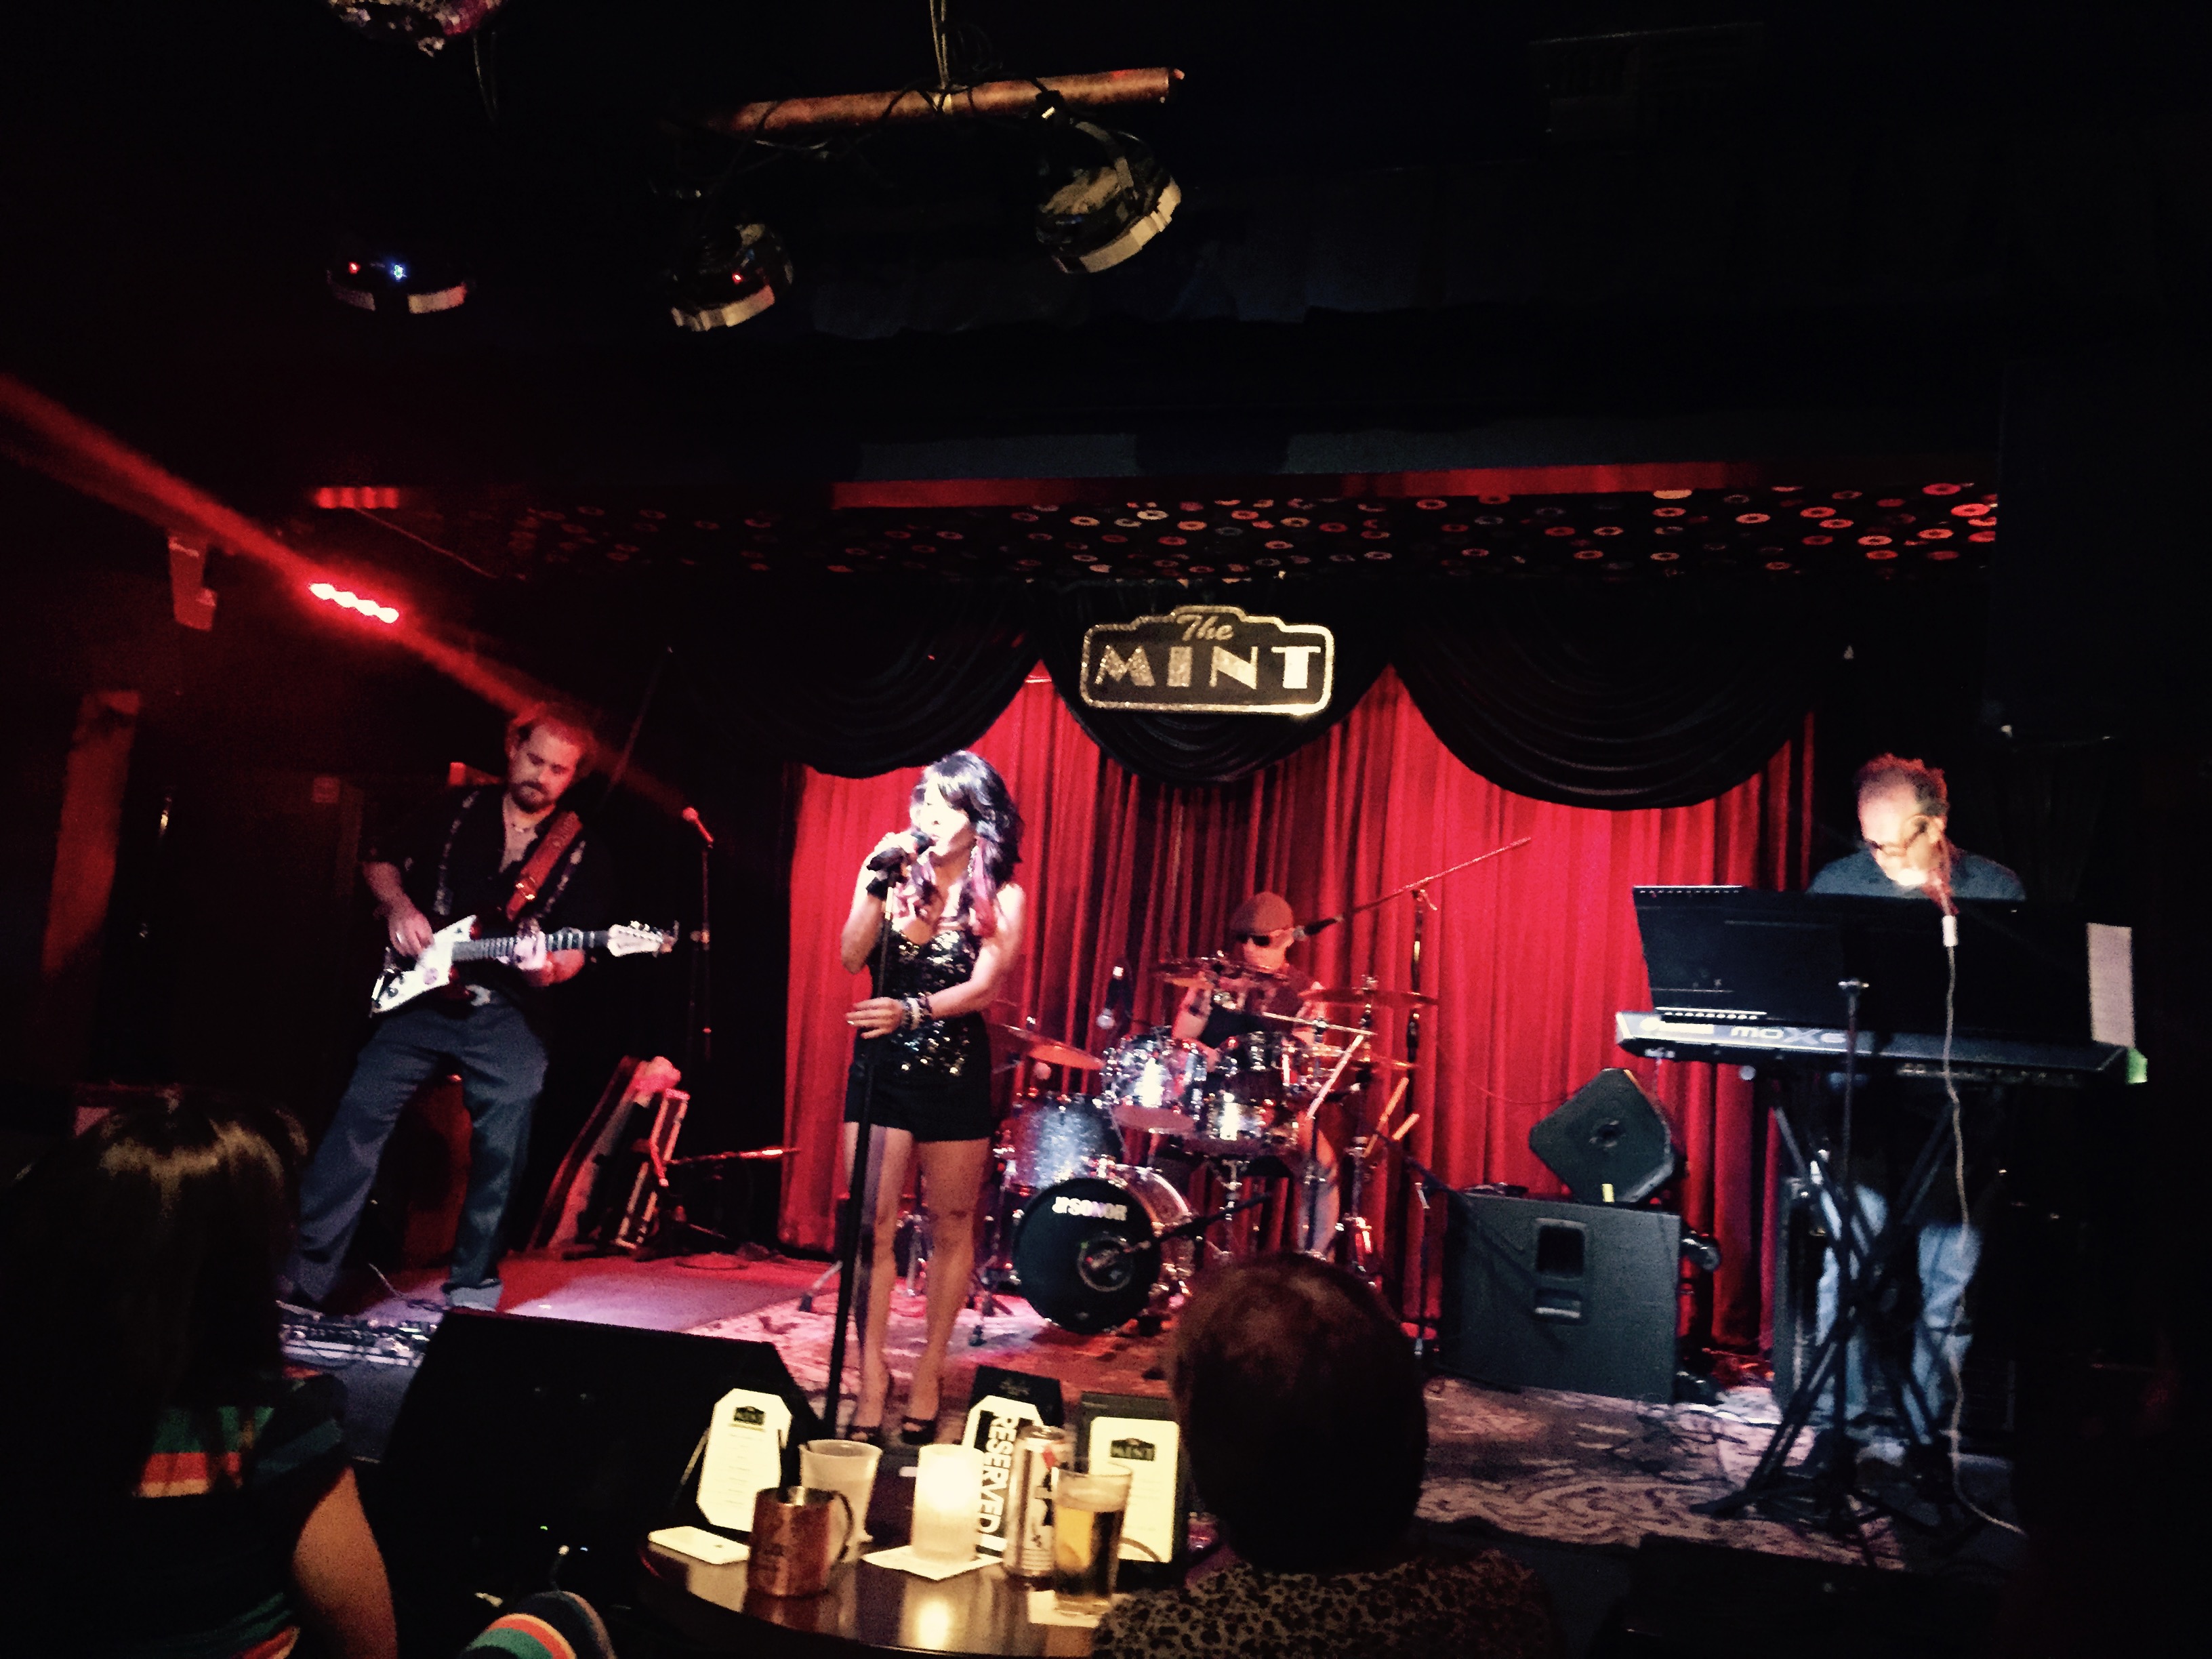 Mist performing with her band at The Mint, 6/7/15